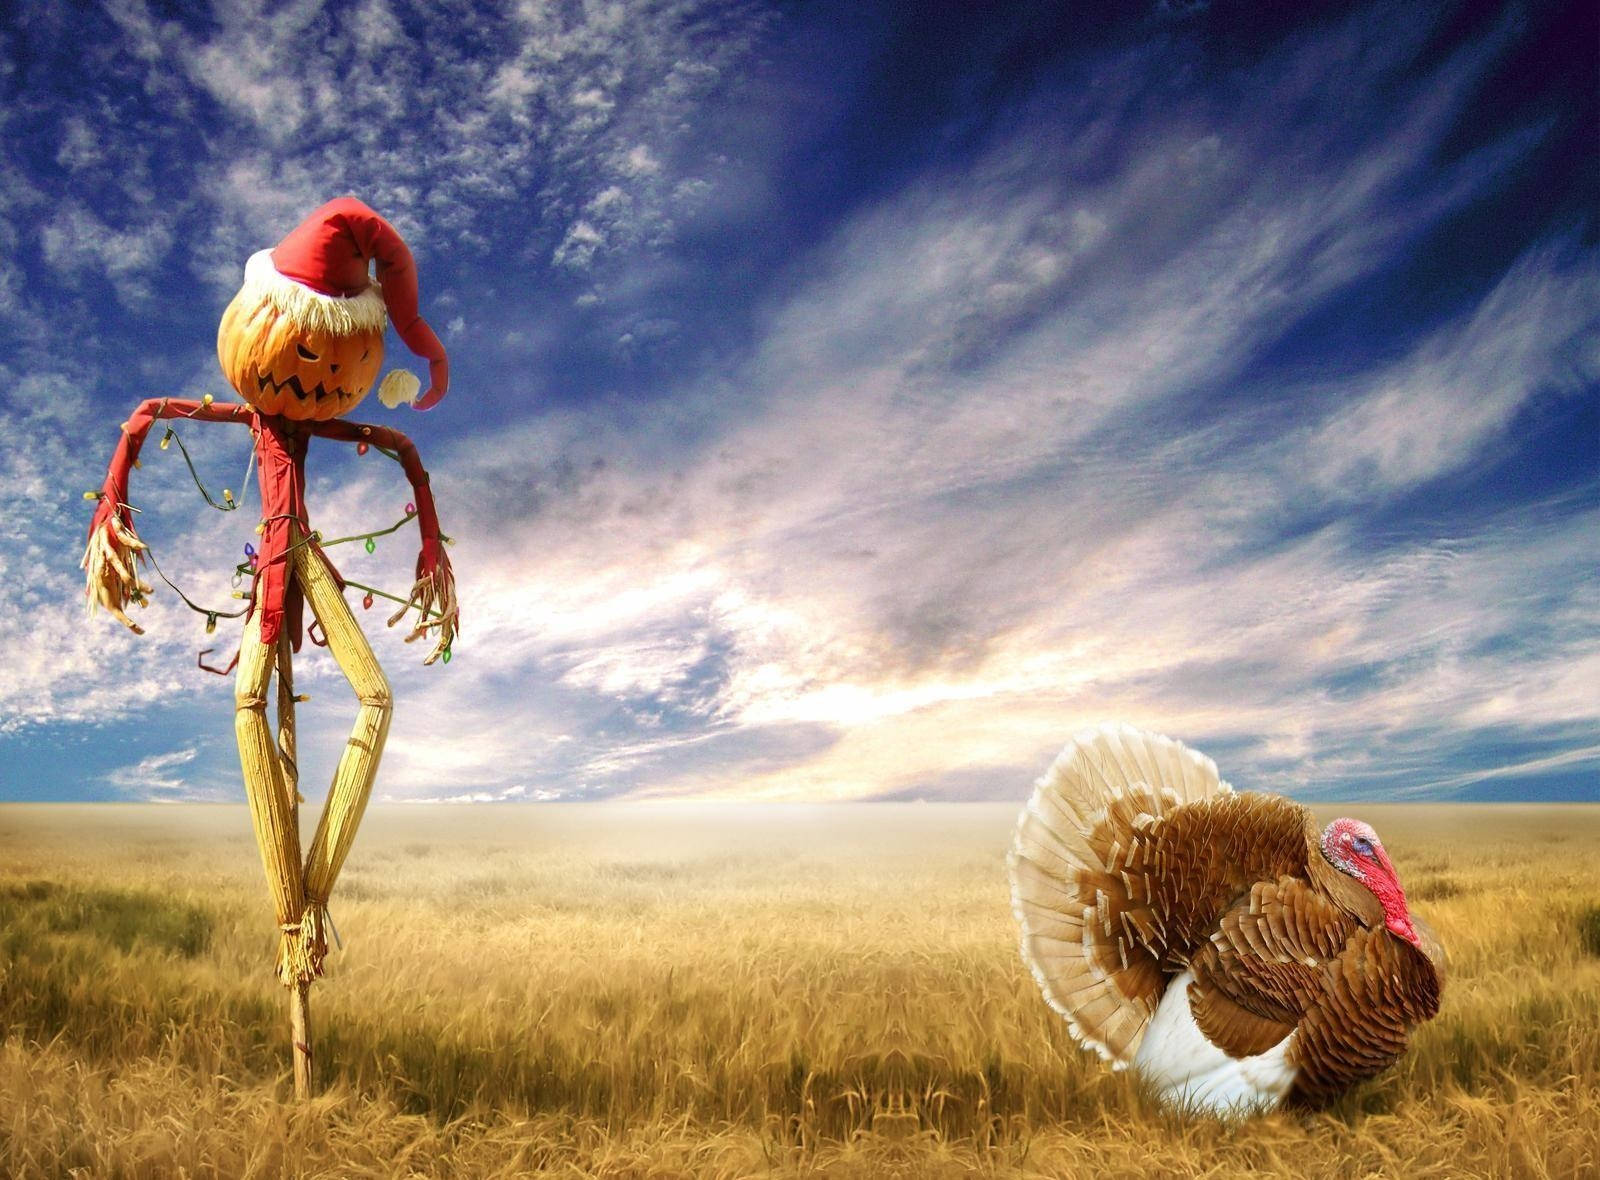 A Turkey And A Scarecrow In A Field